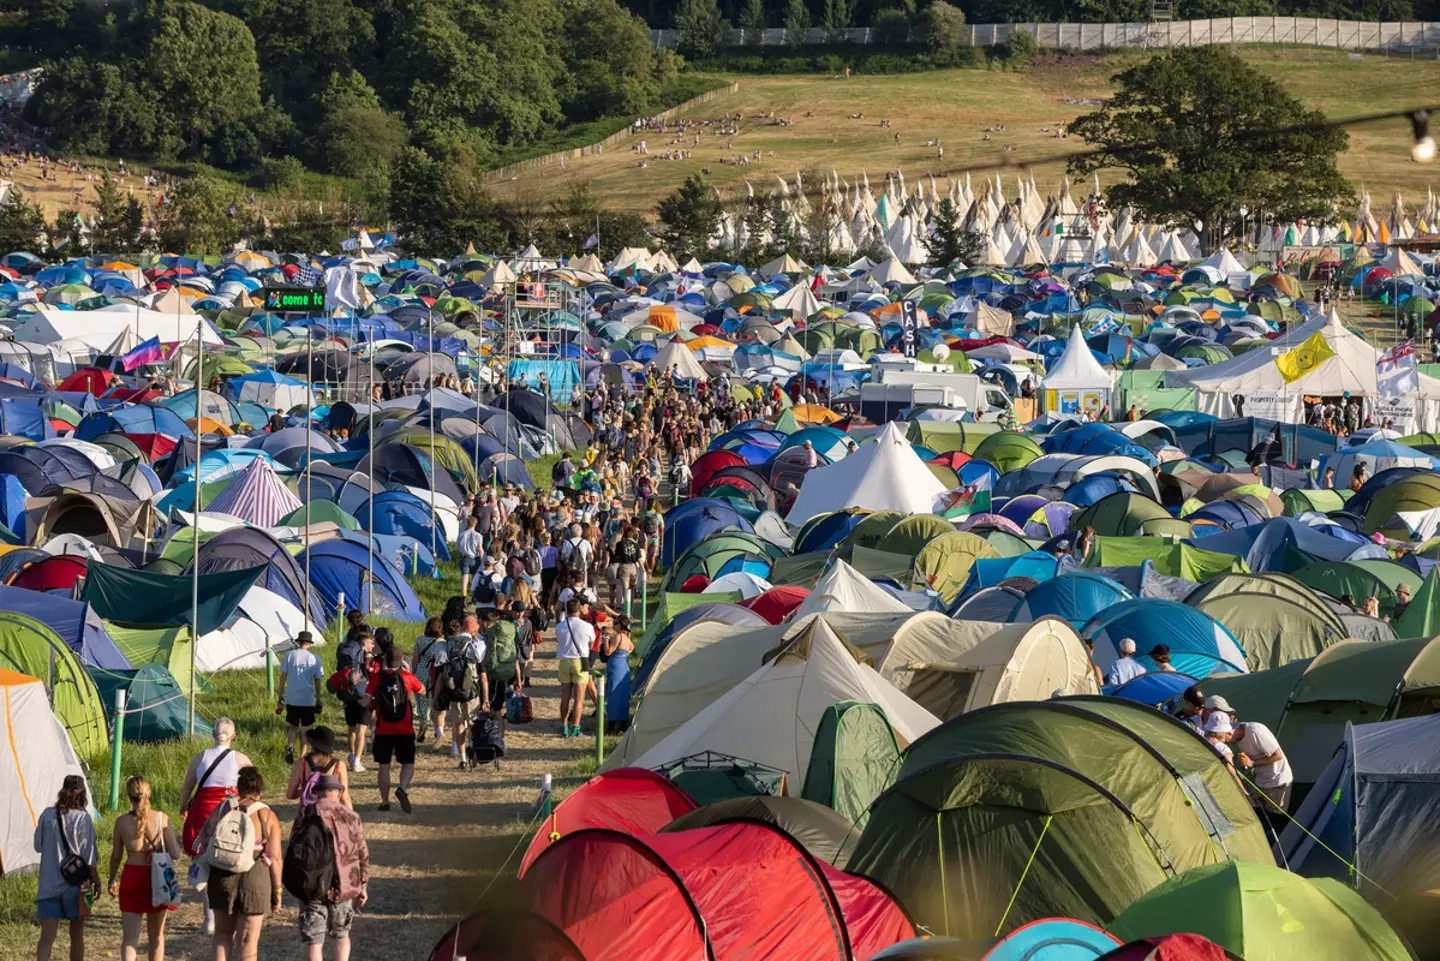 The feud was reignited at Glastonbury Festival, the jury was told.